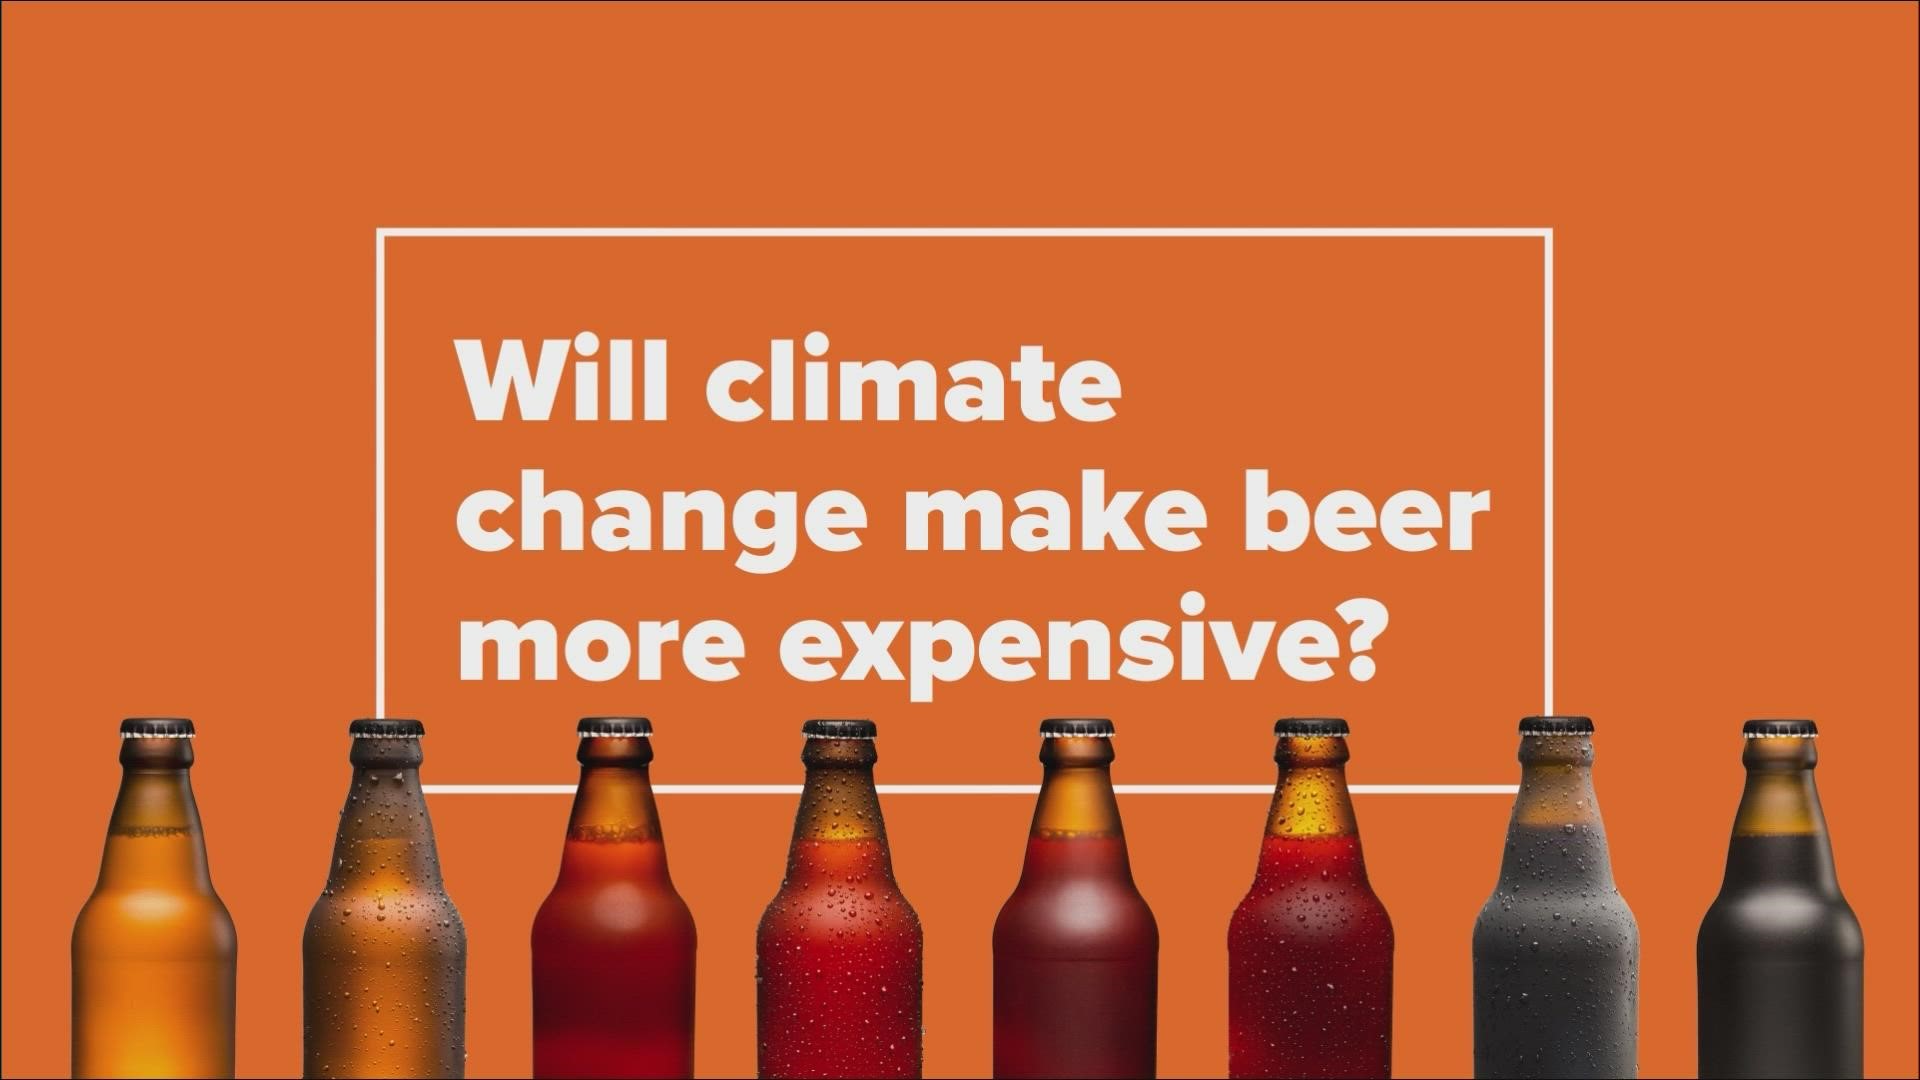 We can VERIFY, yes, extreme drought and heat are impacting the global beer supply and could lead to higher costs.